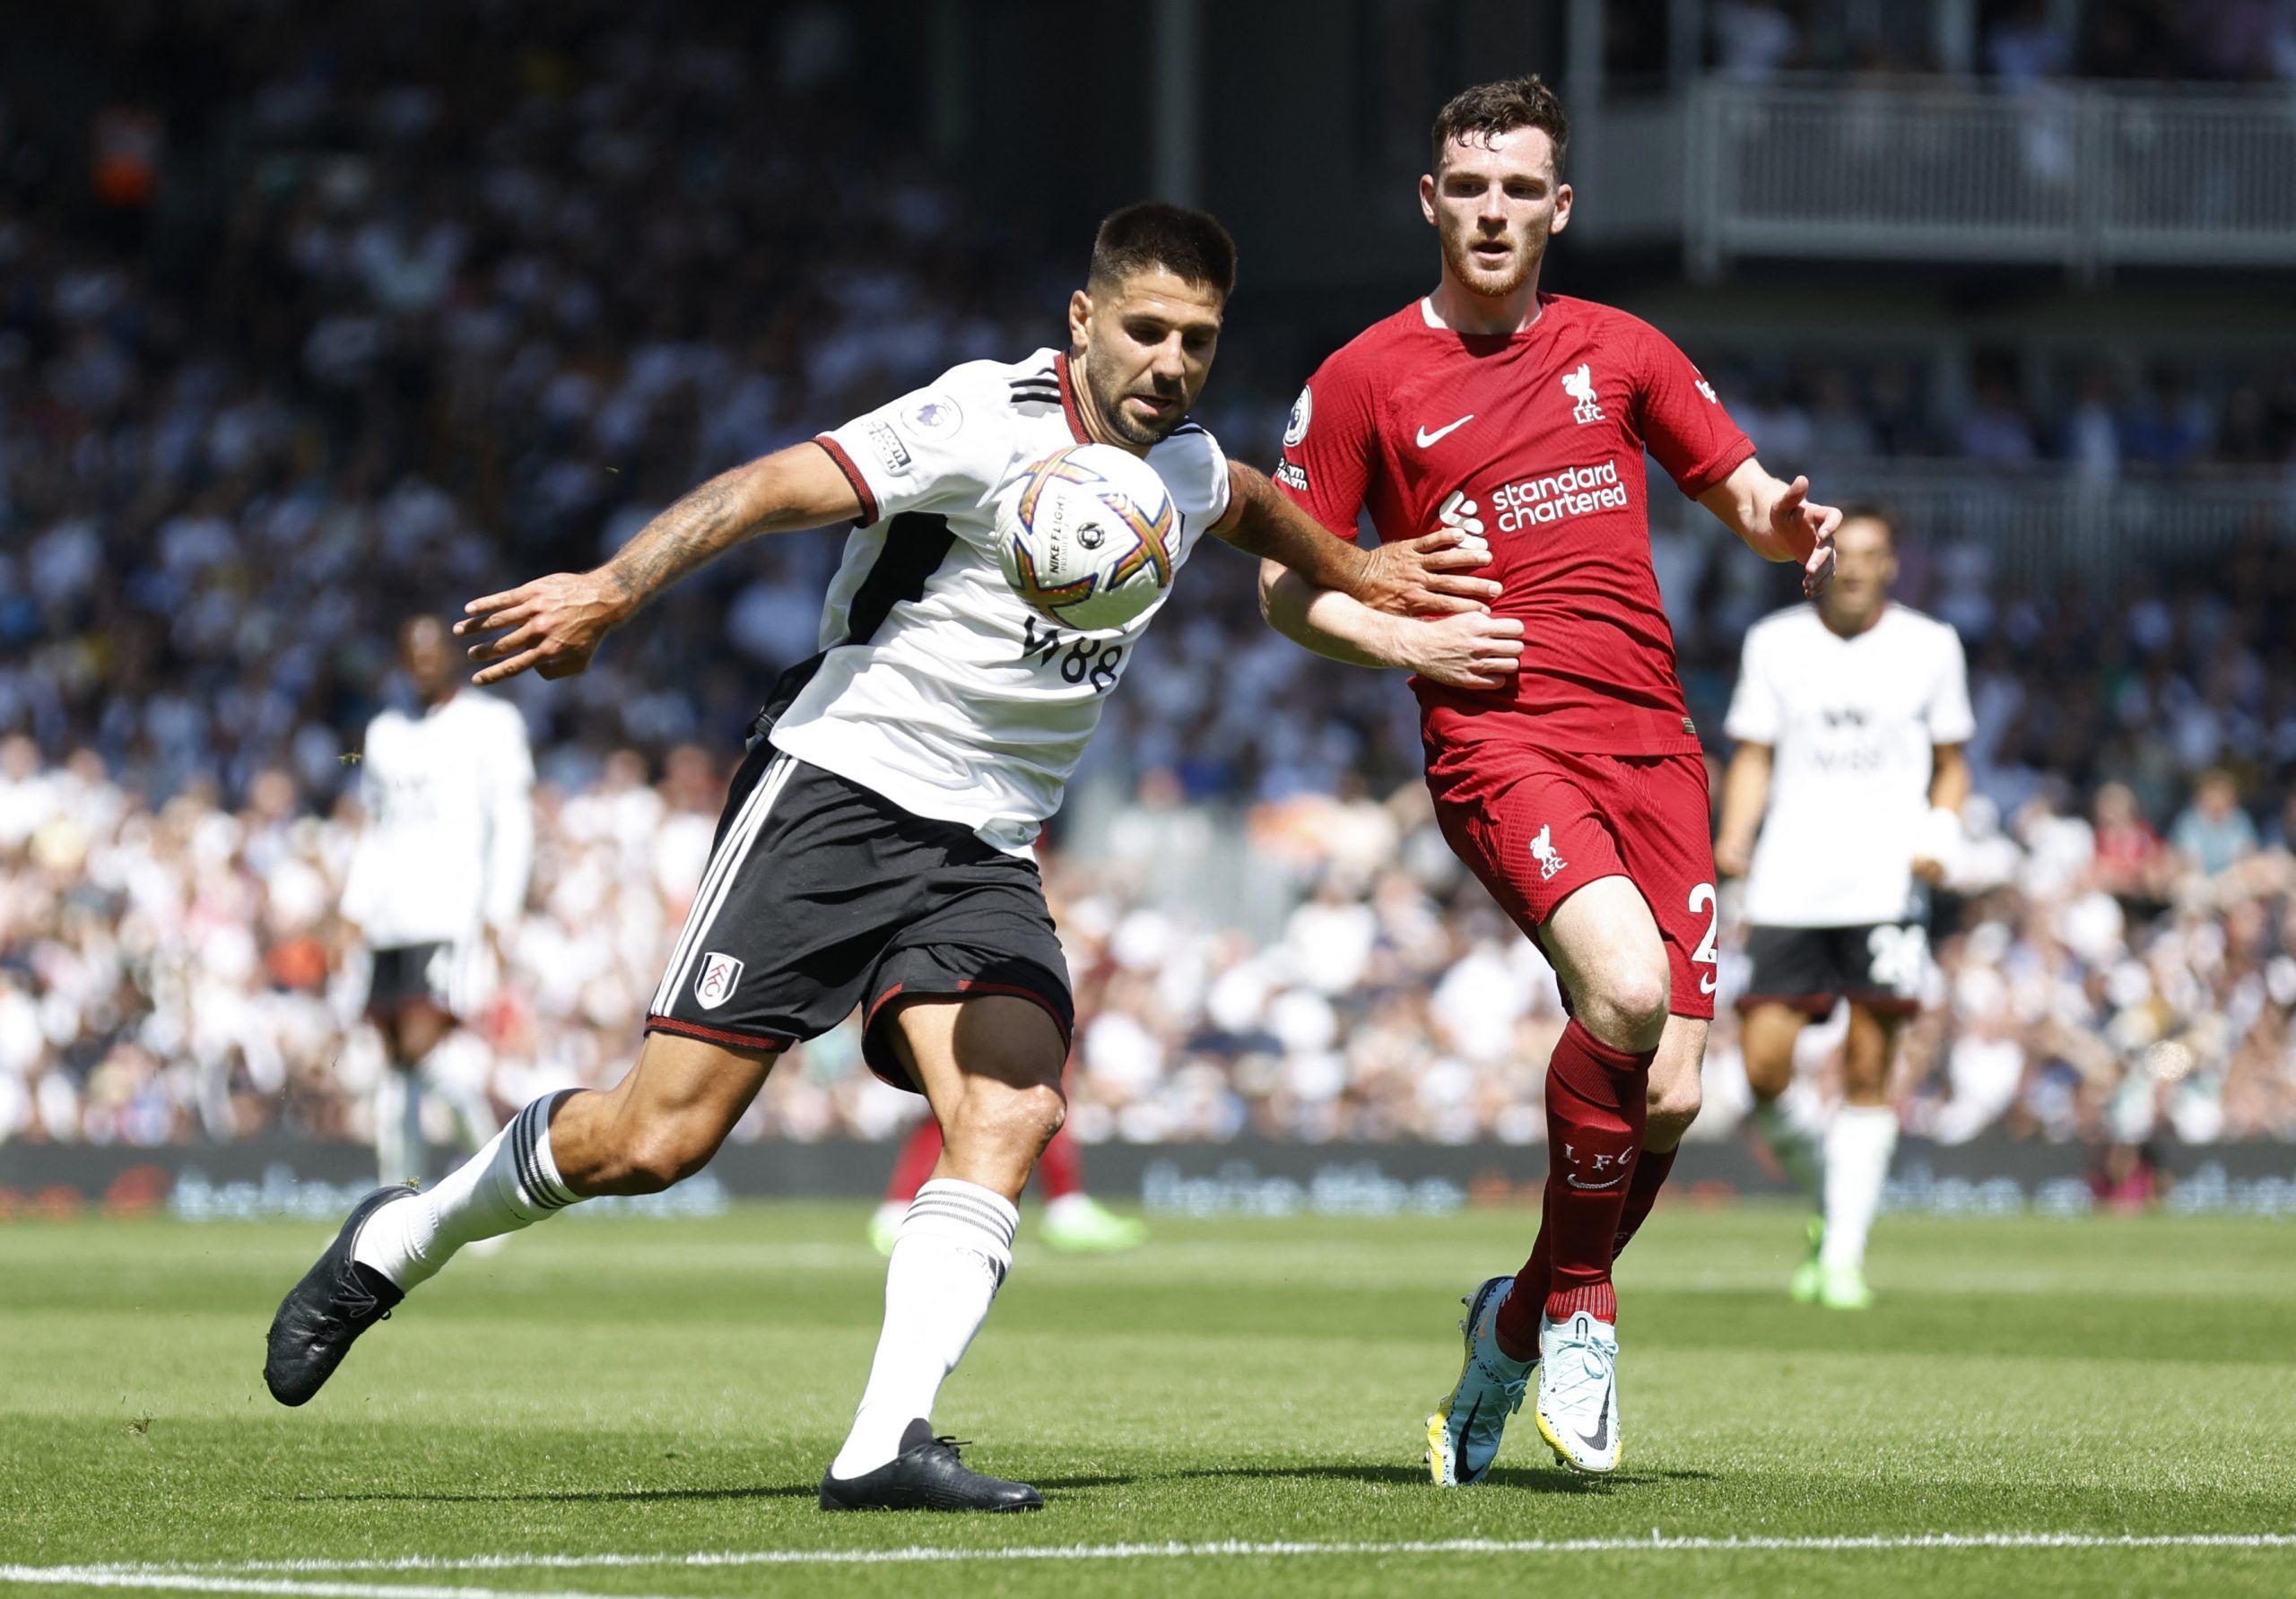 Soccer Football - Premier League - Fulham v Liverpool - Craven Cottage, London, Britain - August 6, 2022 Liverpool's Andrew Robertson in action with Fulham's Aleksandar Mitrovic Action Images via Reuters/Peter Cziborra EDITORIAL USE ONLY. No use with unauthorized audio, video, data, fixture lists, club/league logos or 'live' services. Online in-match use limited to 75 images, no video emulation. No use in betting, games or single club /league/player publications.  Please contact your account rep